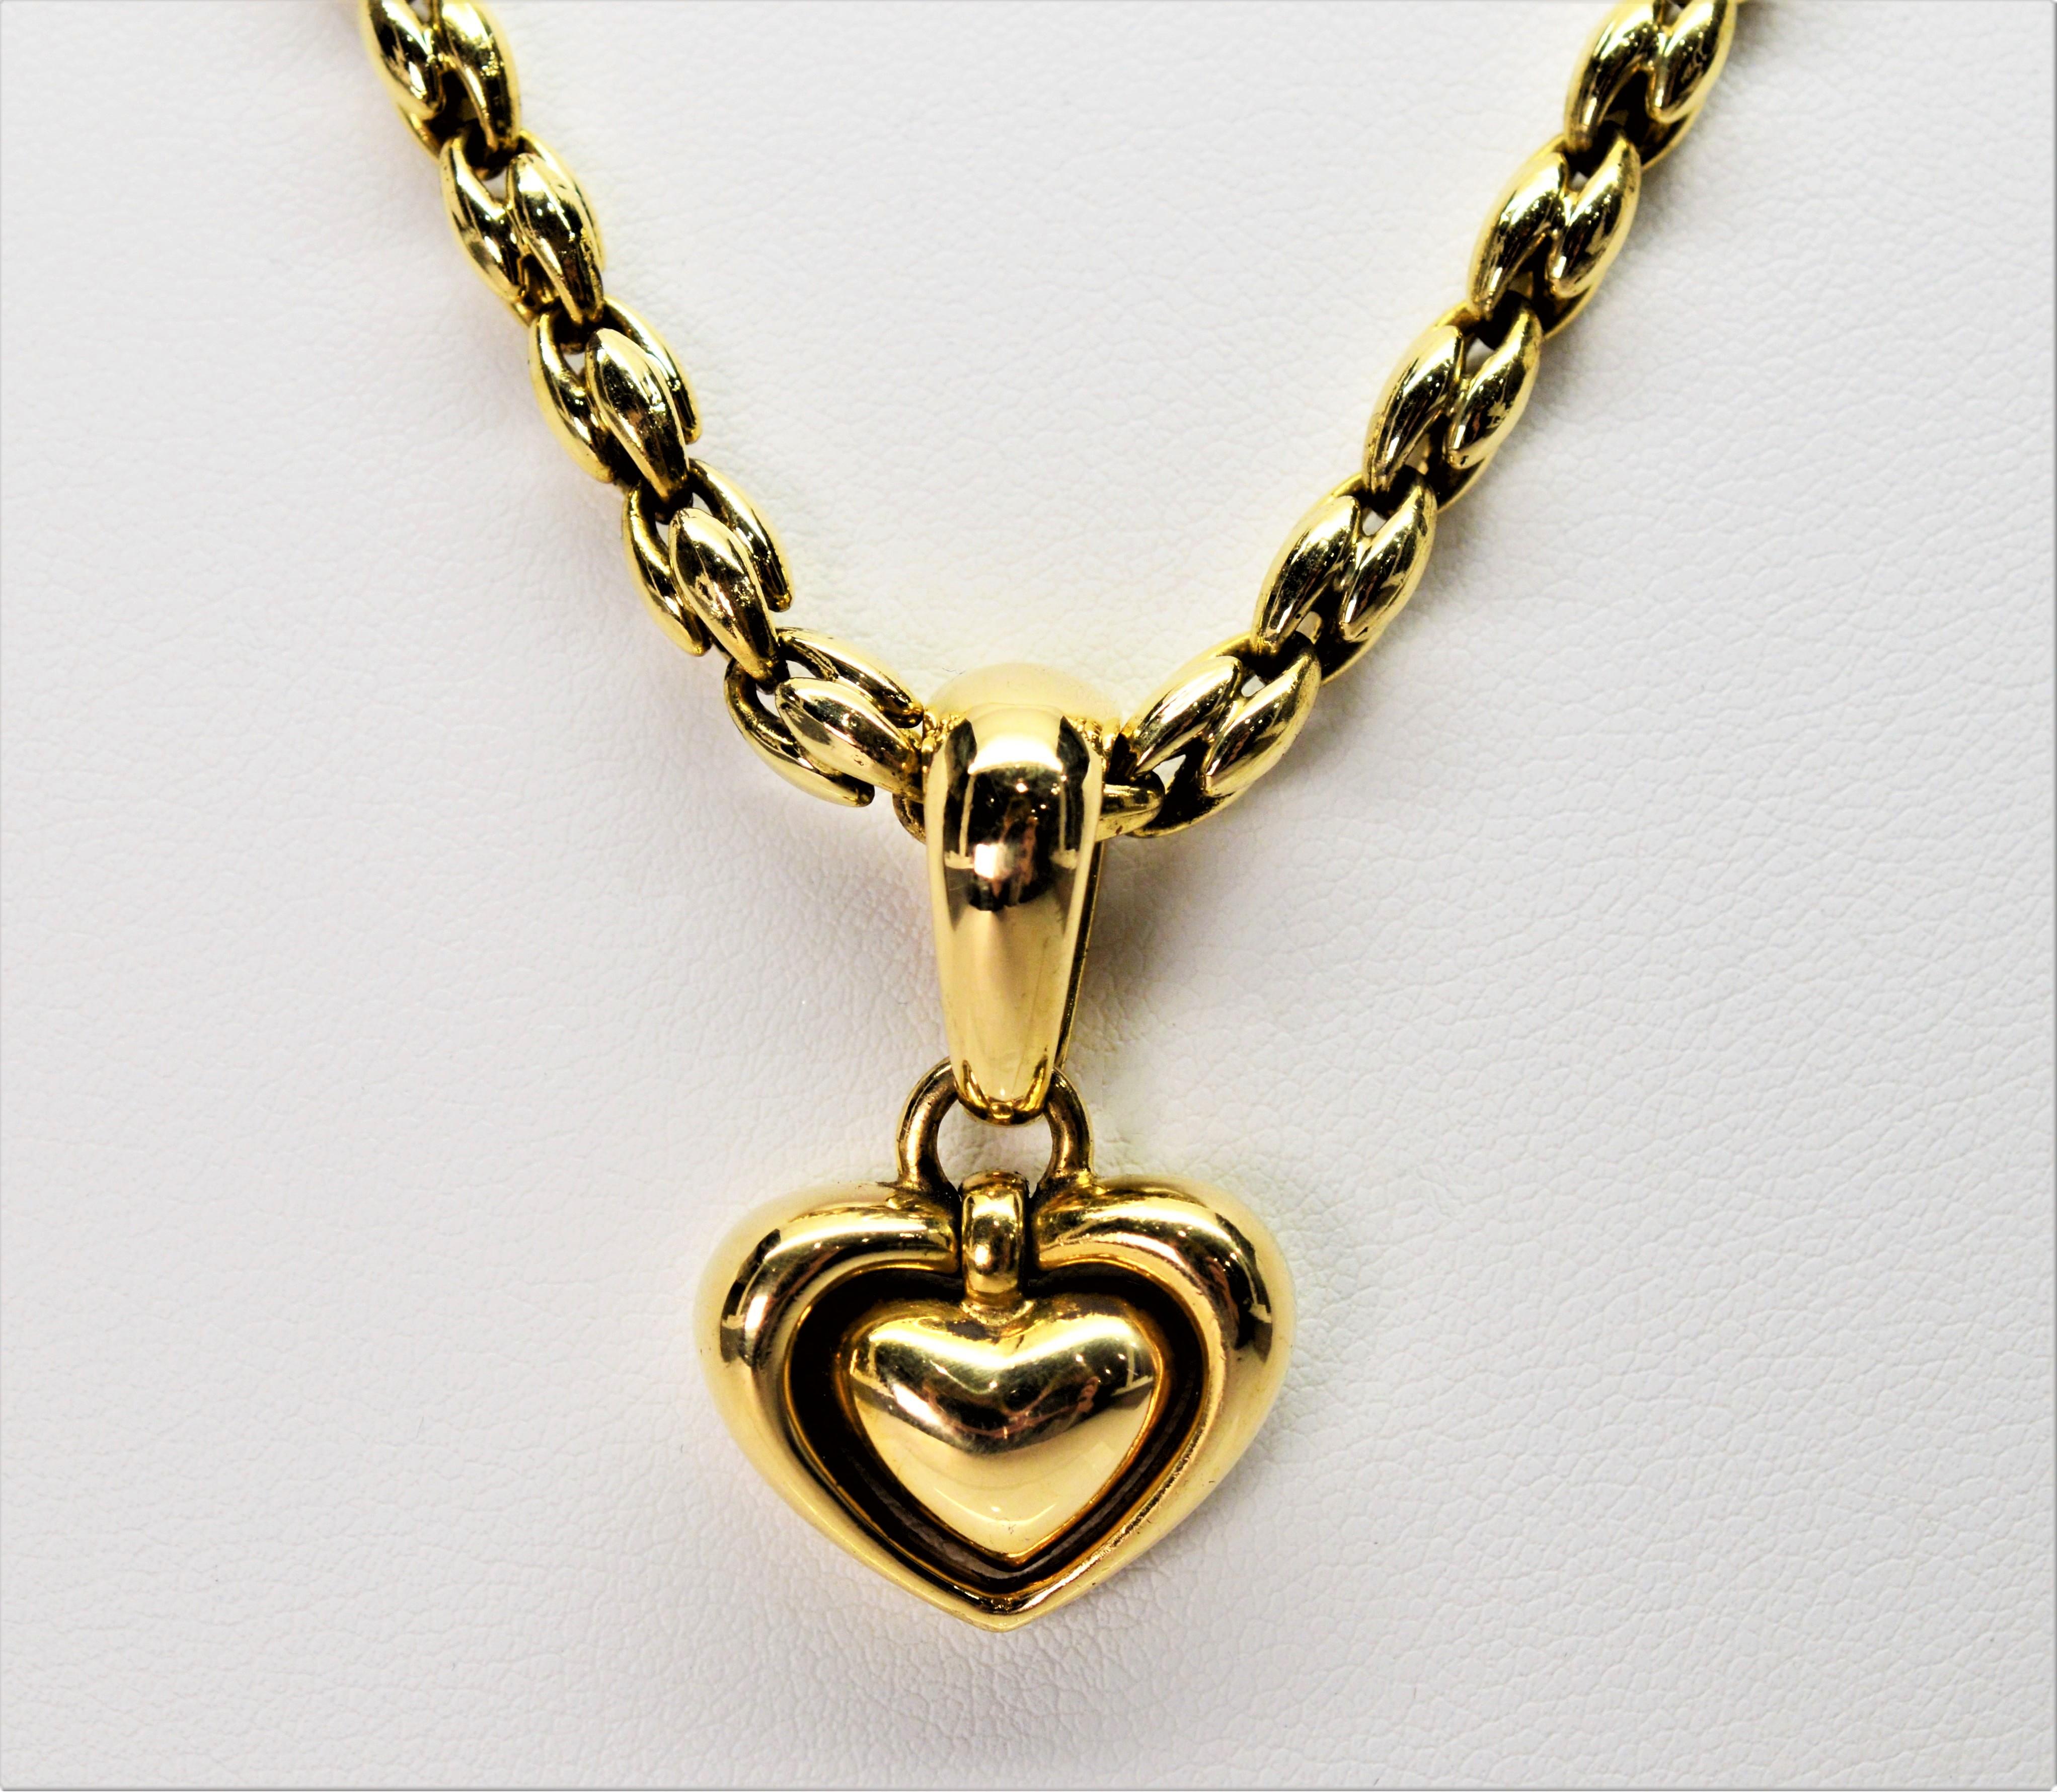 Quality Italian made by Chimento in bright eighteen karat (18K) yellow gold, this romantic pendant necklace displays a pleasingly plump double heart gold charm enhancer. The heart pendant can be removed creating a sophisticated fancy designer 5mm